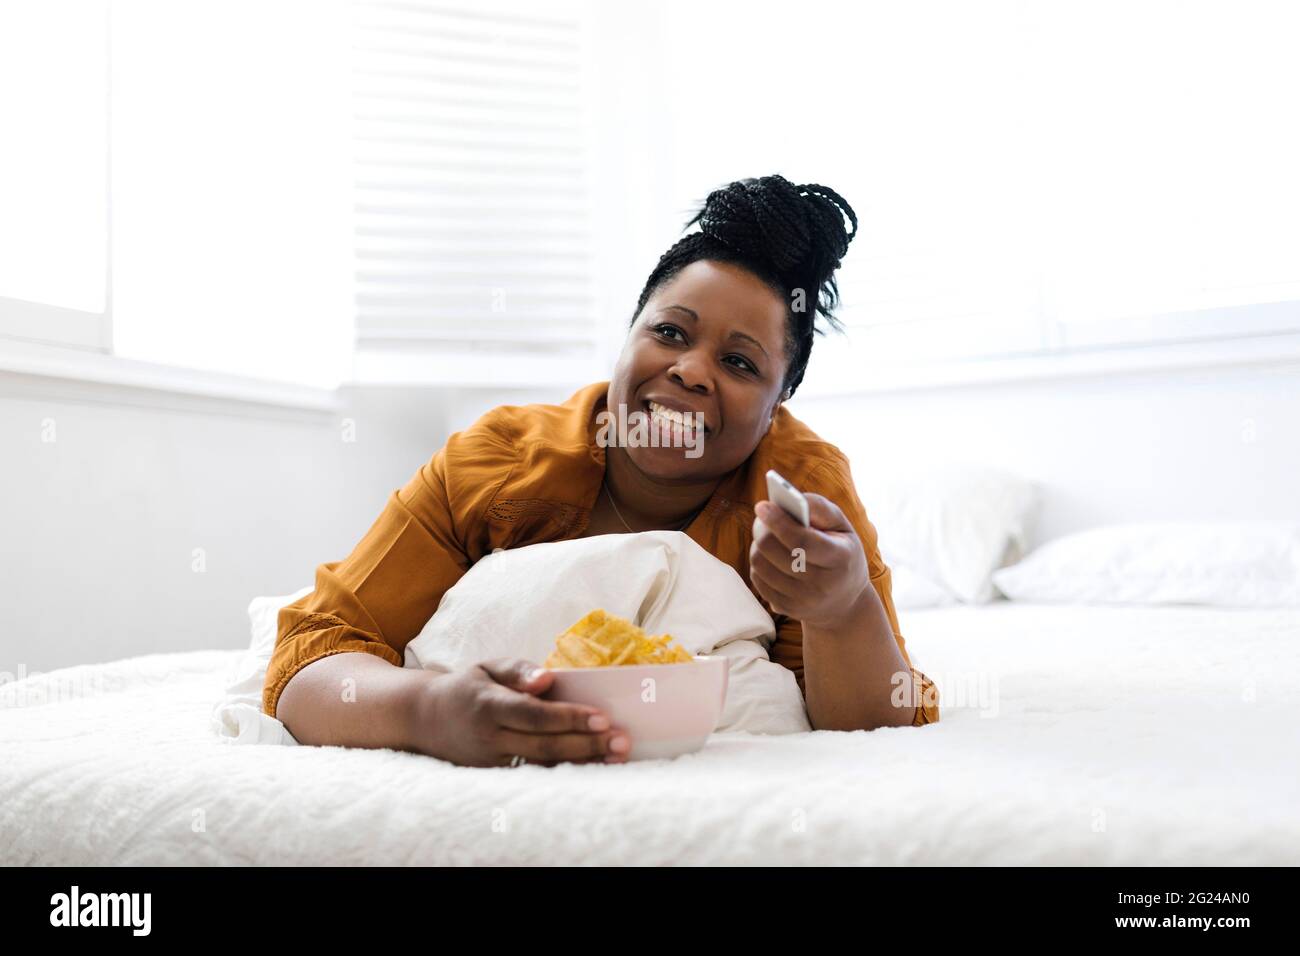 Woman eating potato chips in bed Stock Photo